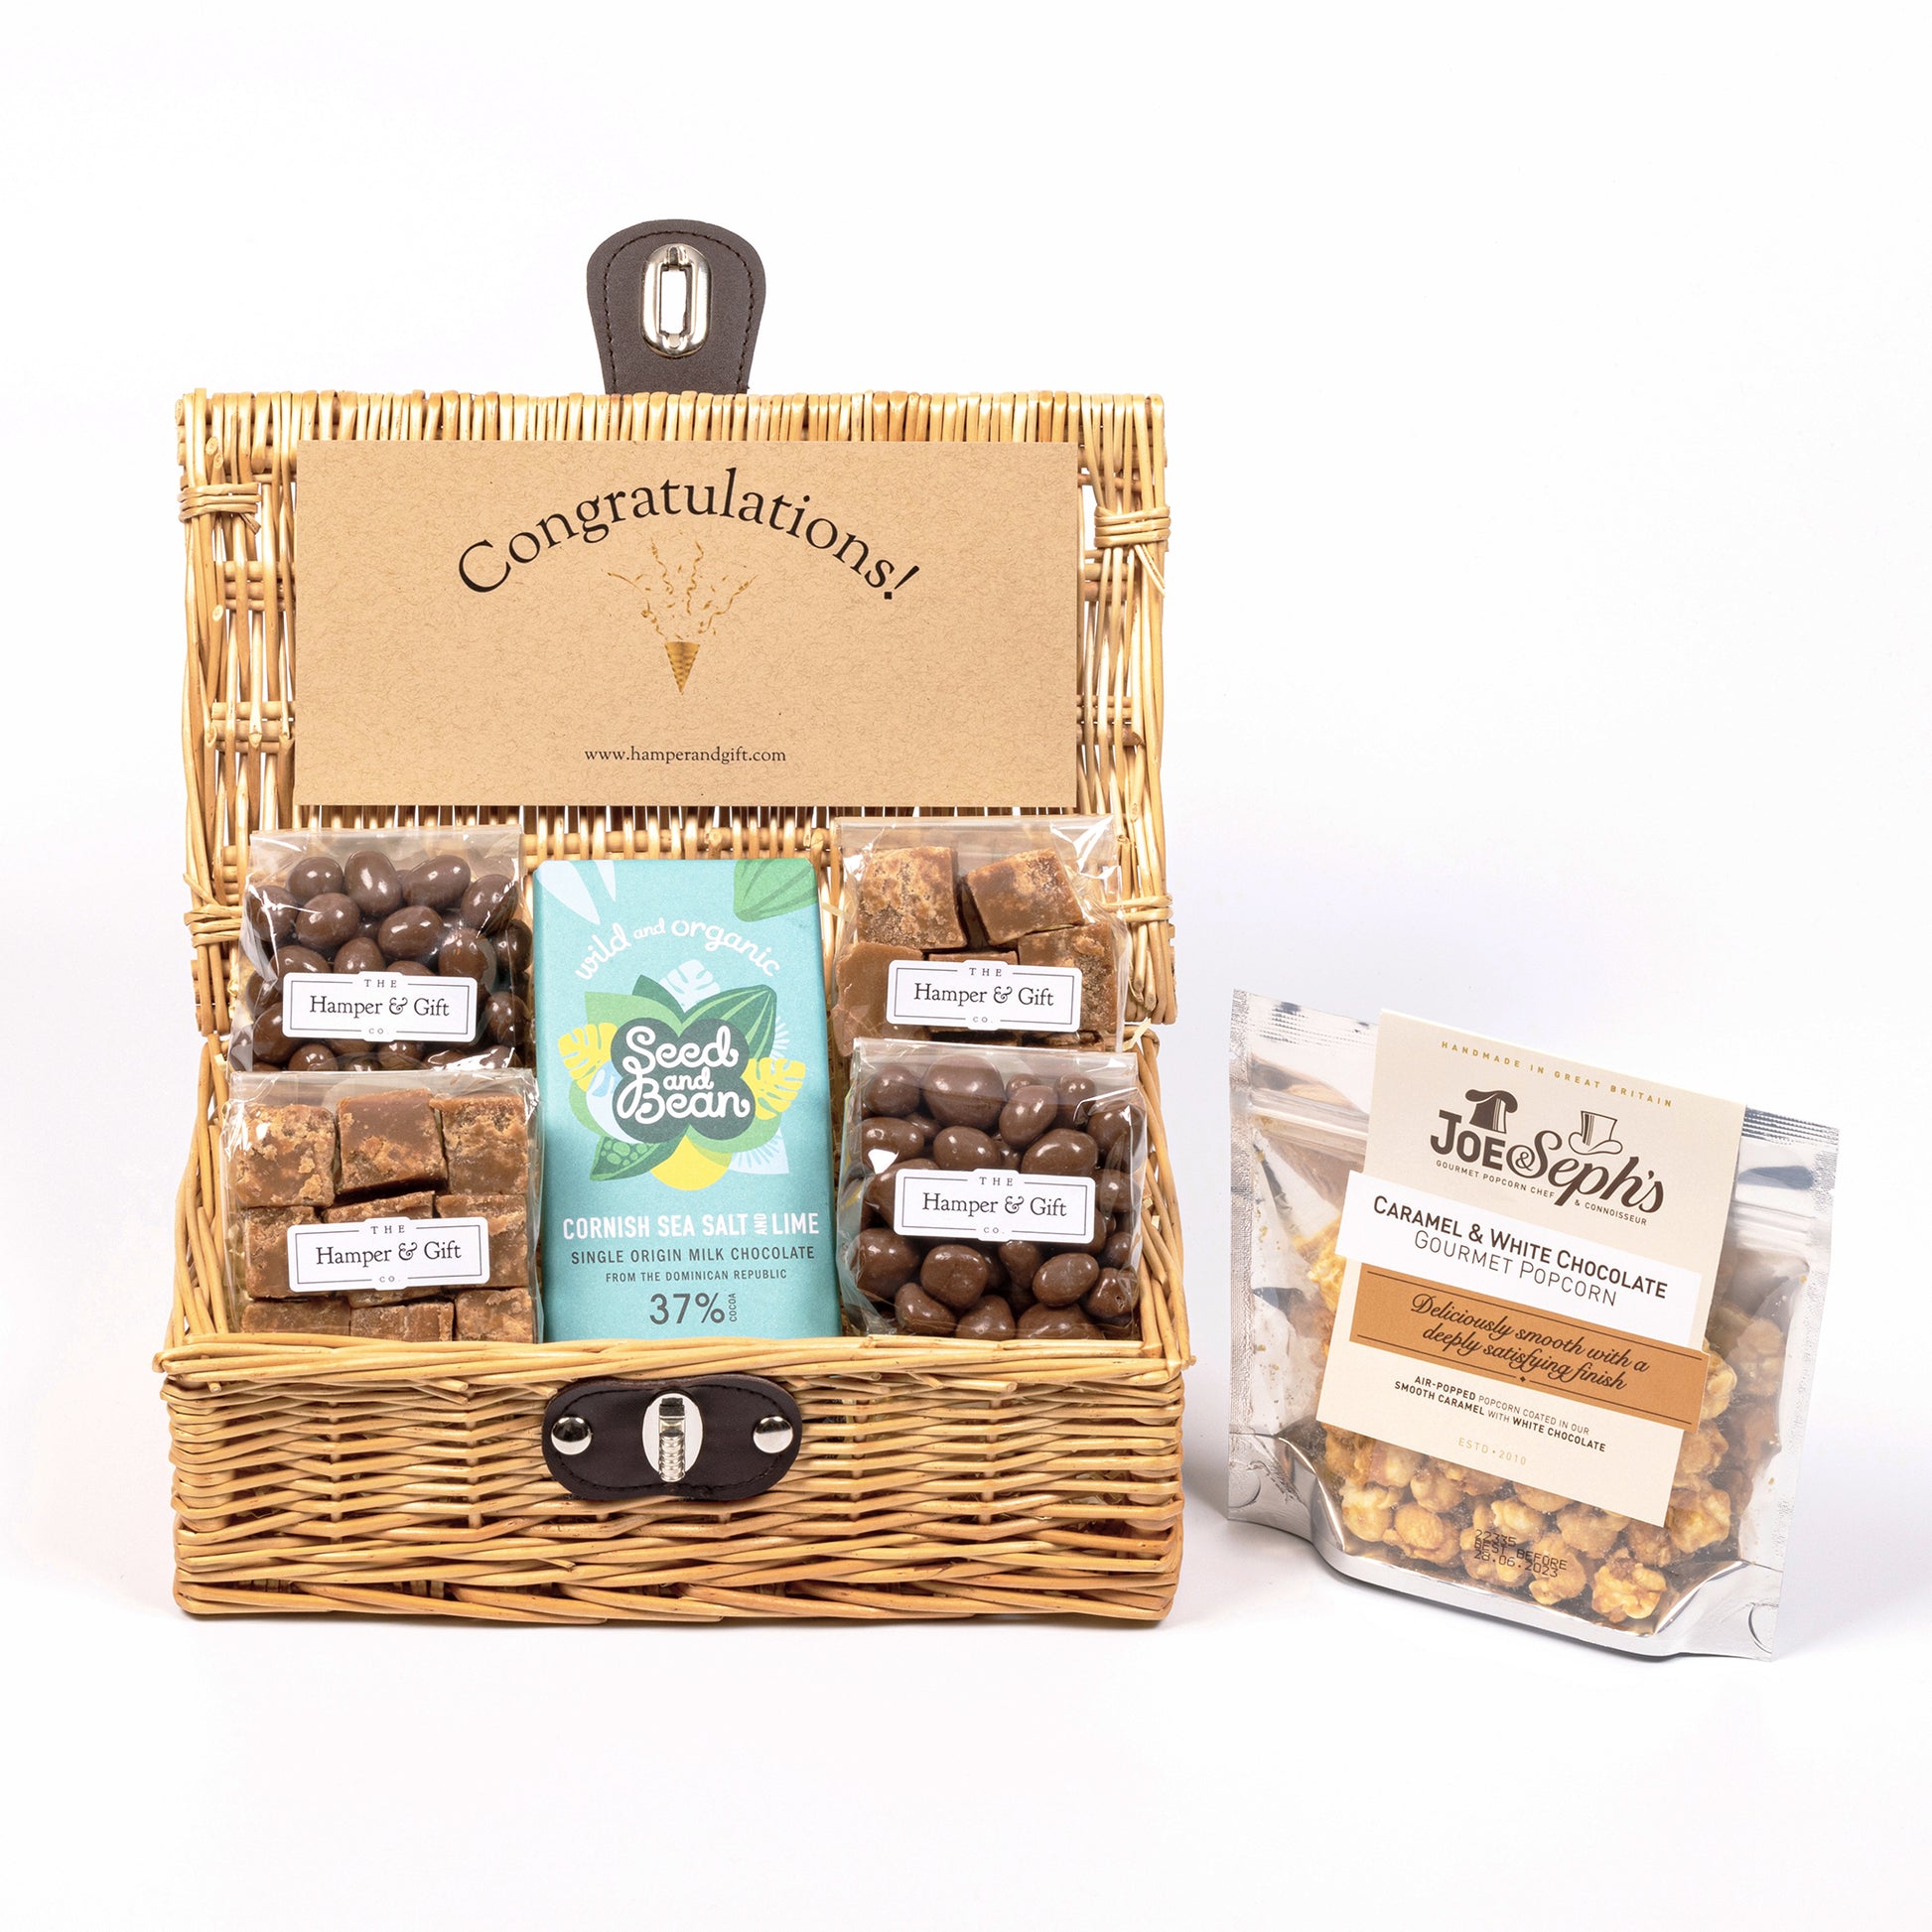 Congratulations Hamper filled with chocolate, fudge and gourmet popcorn